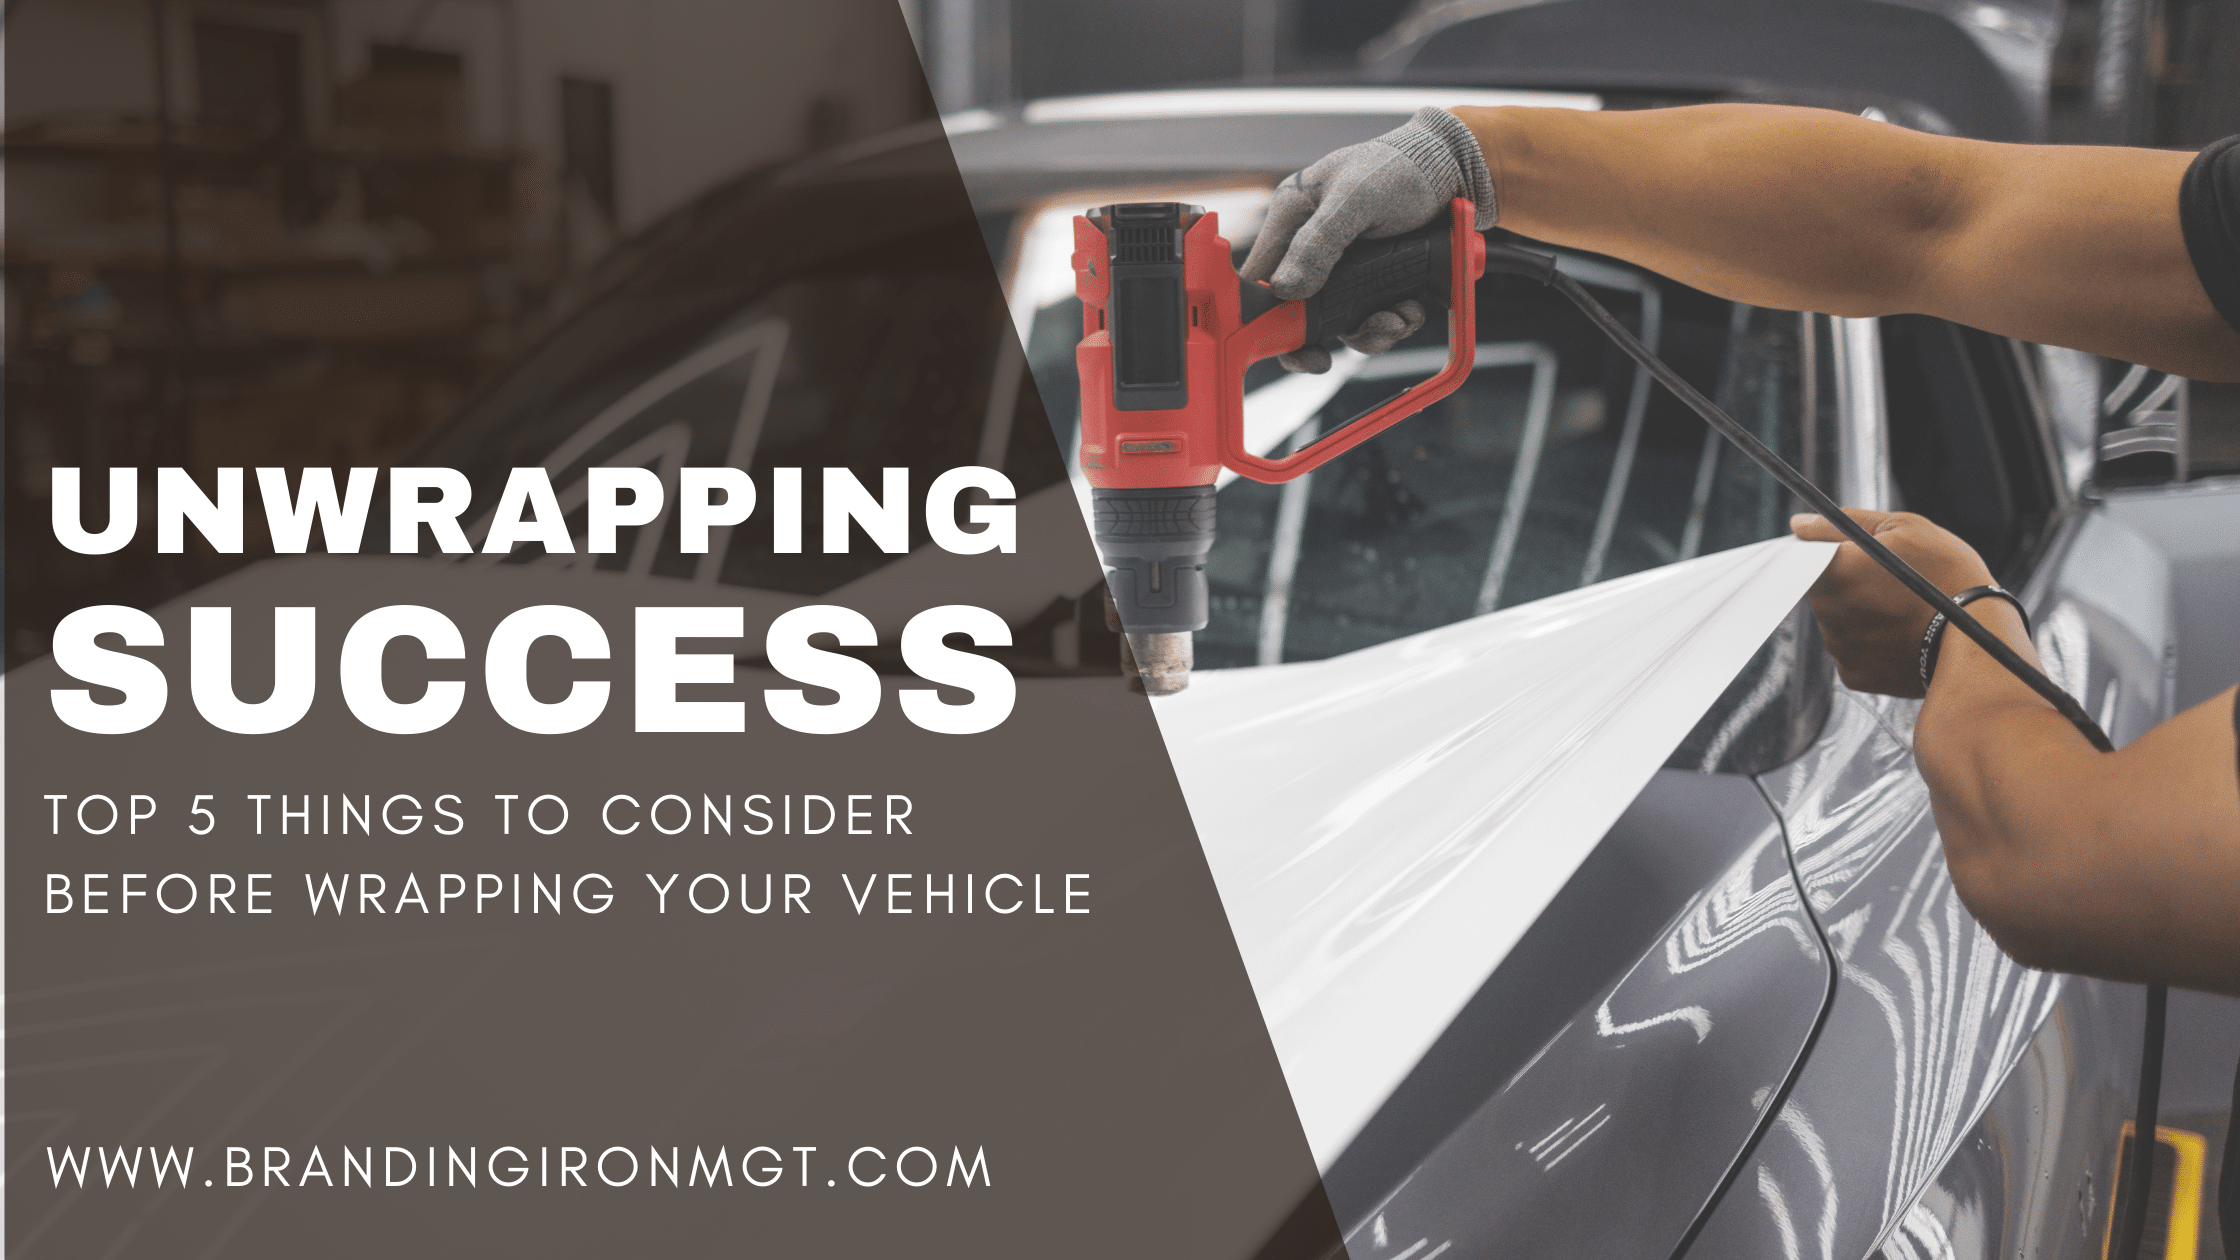 Unwrapping Success: Top 5 Things to Consider Before Wrapping Your Vehicle